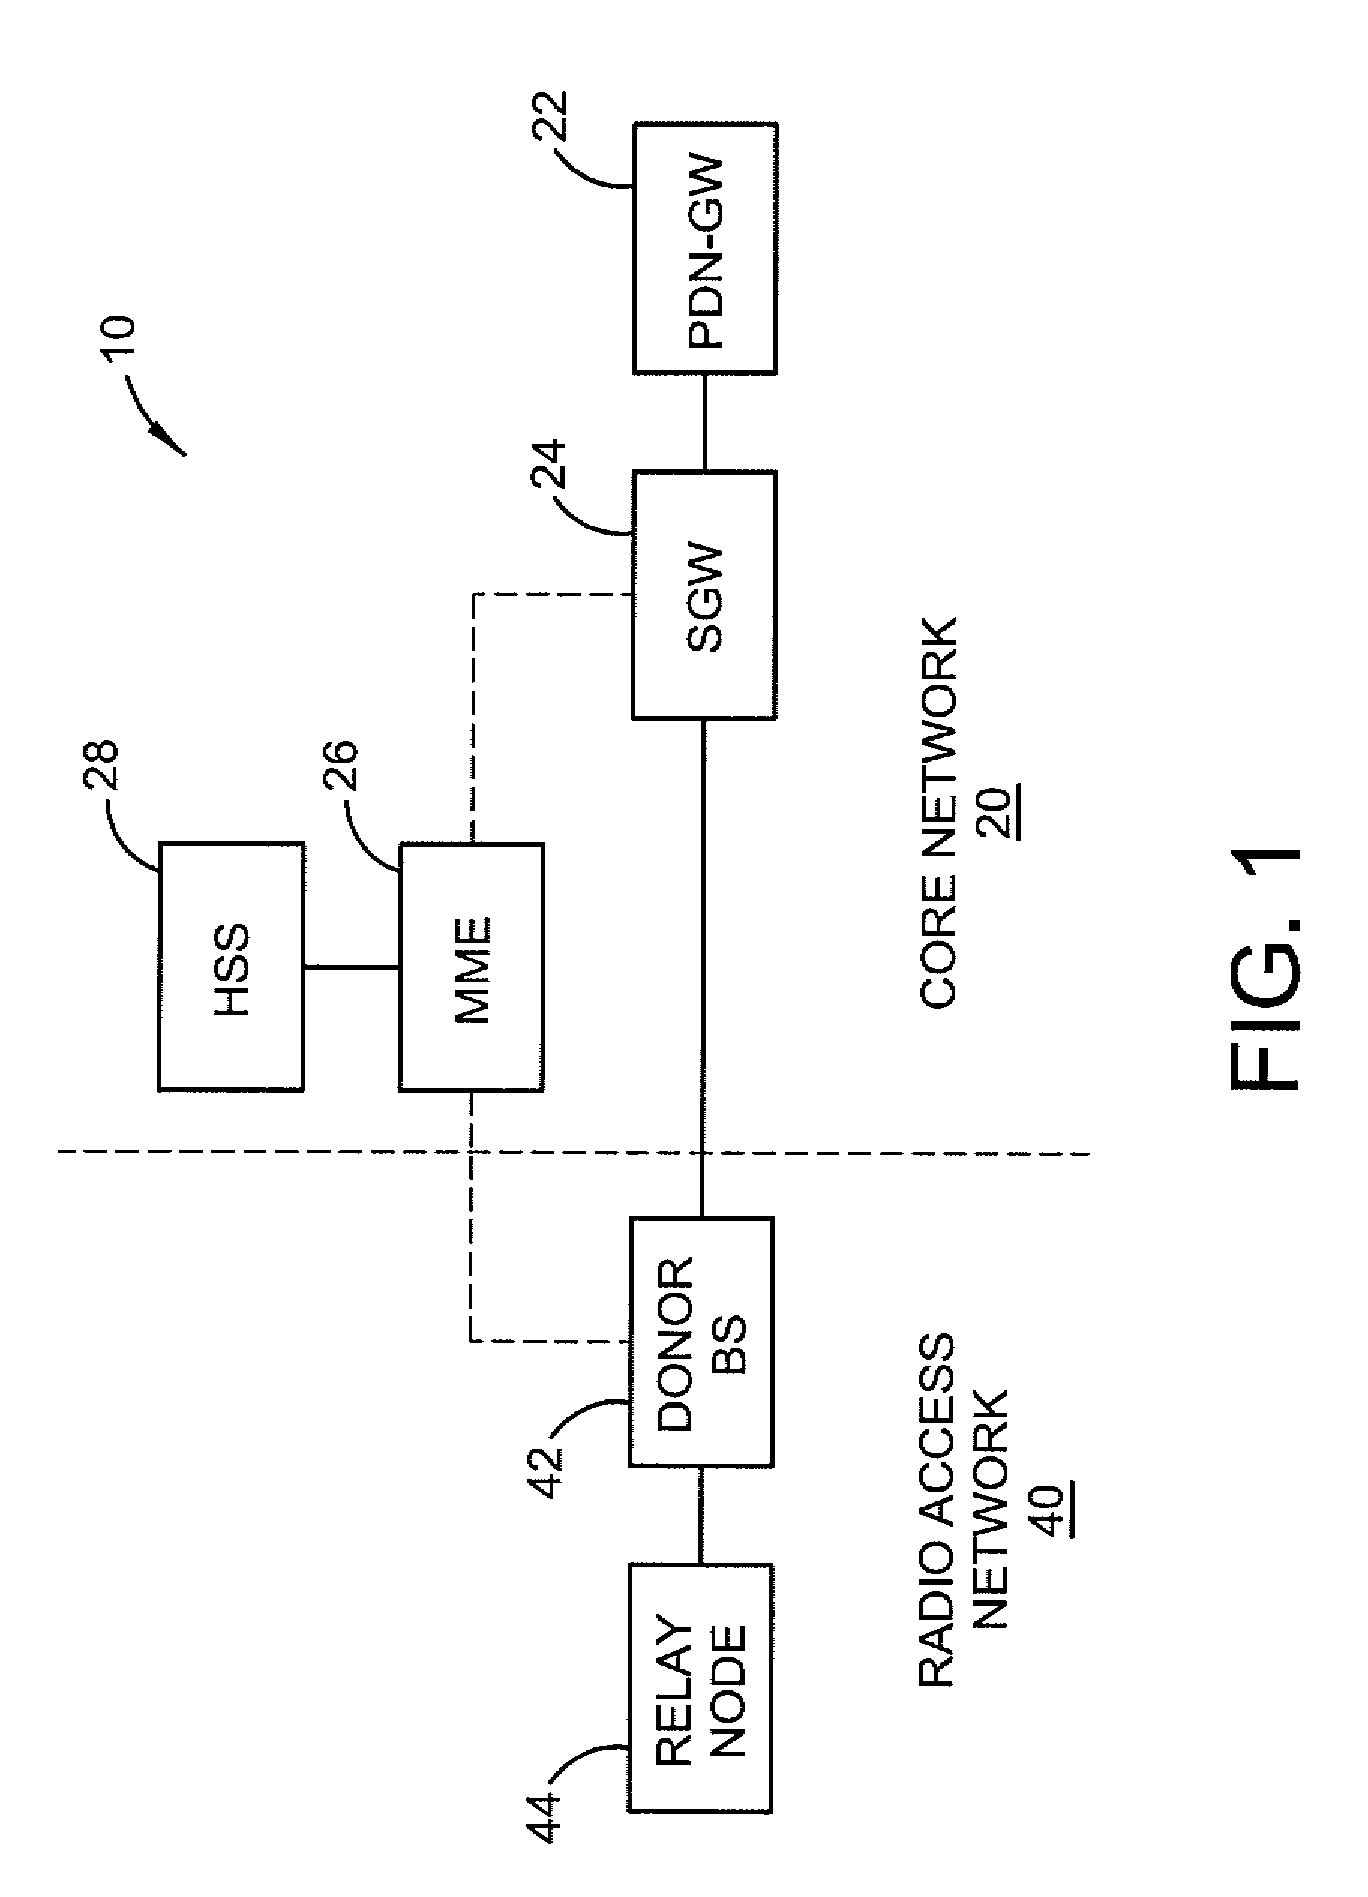 Identification of Relay Nodes in a Communication Network